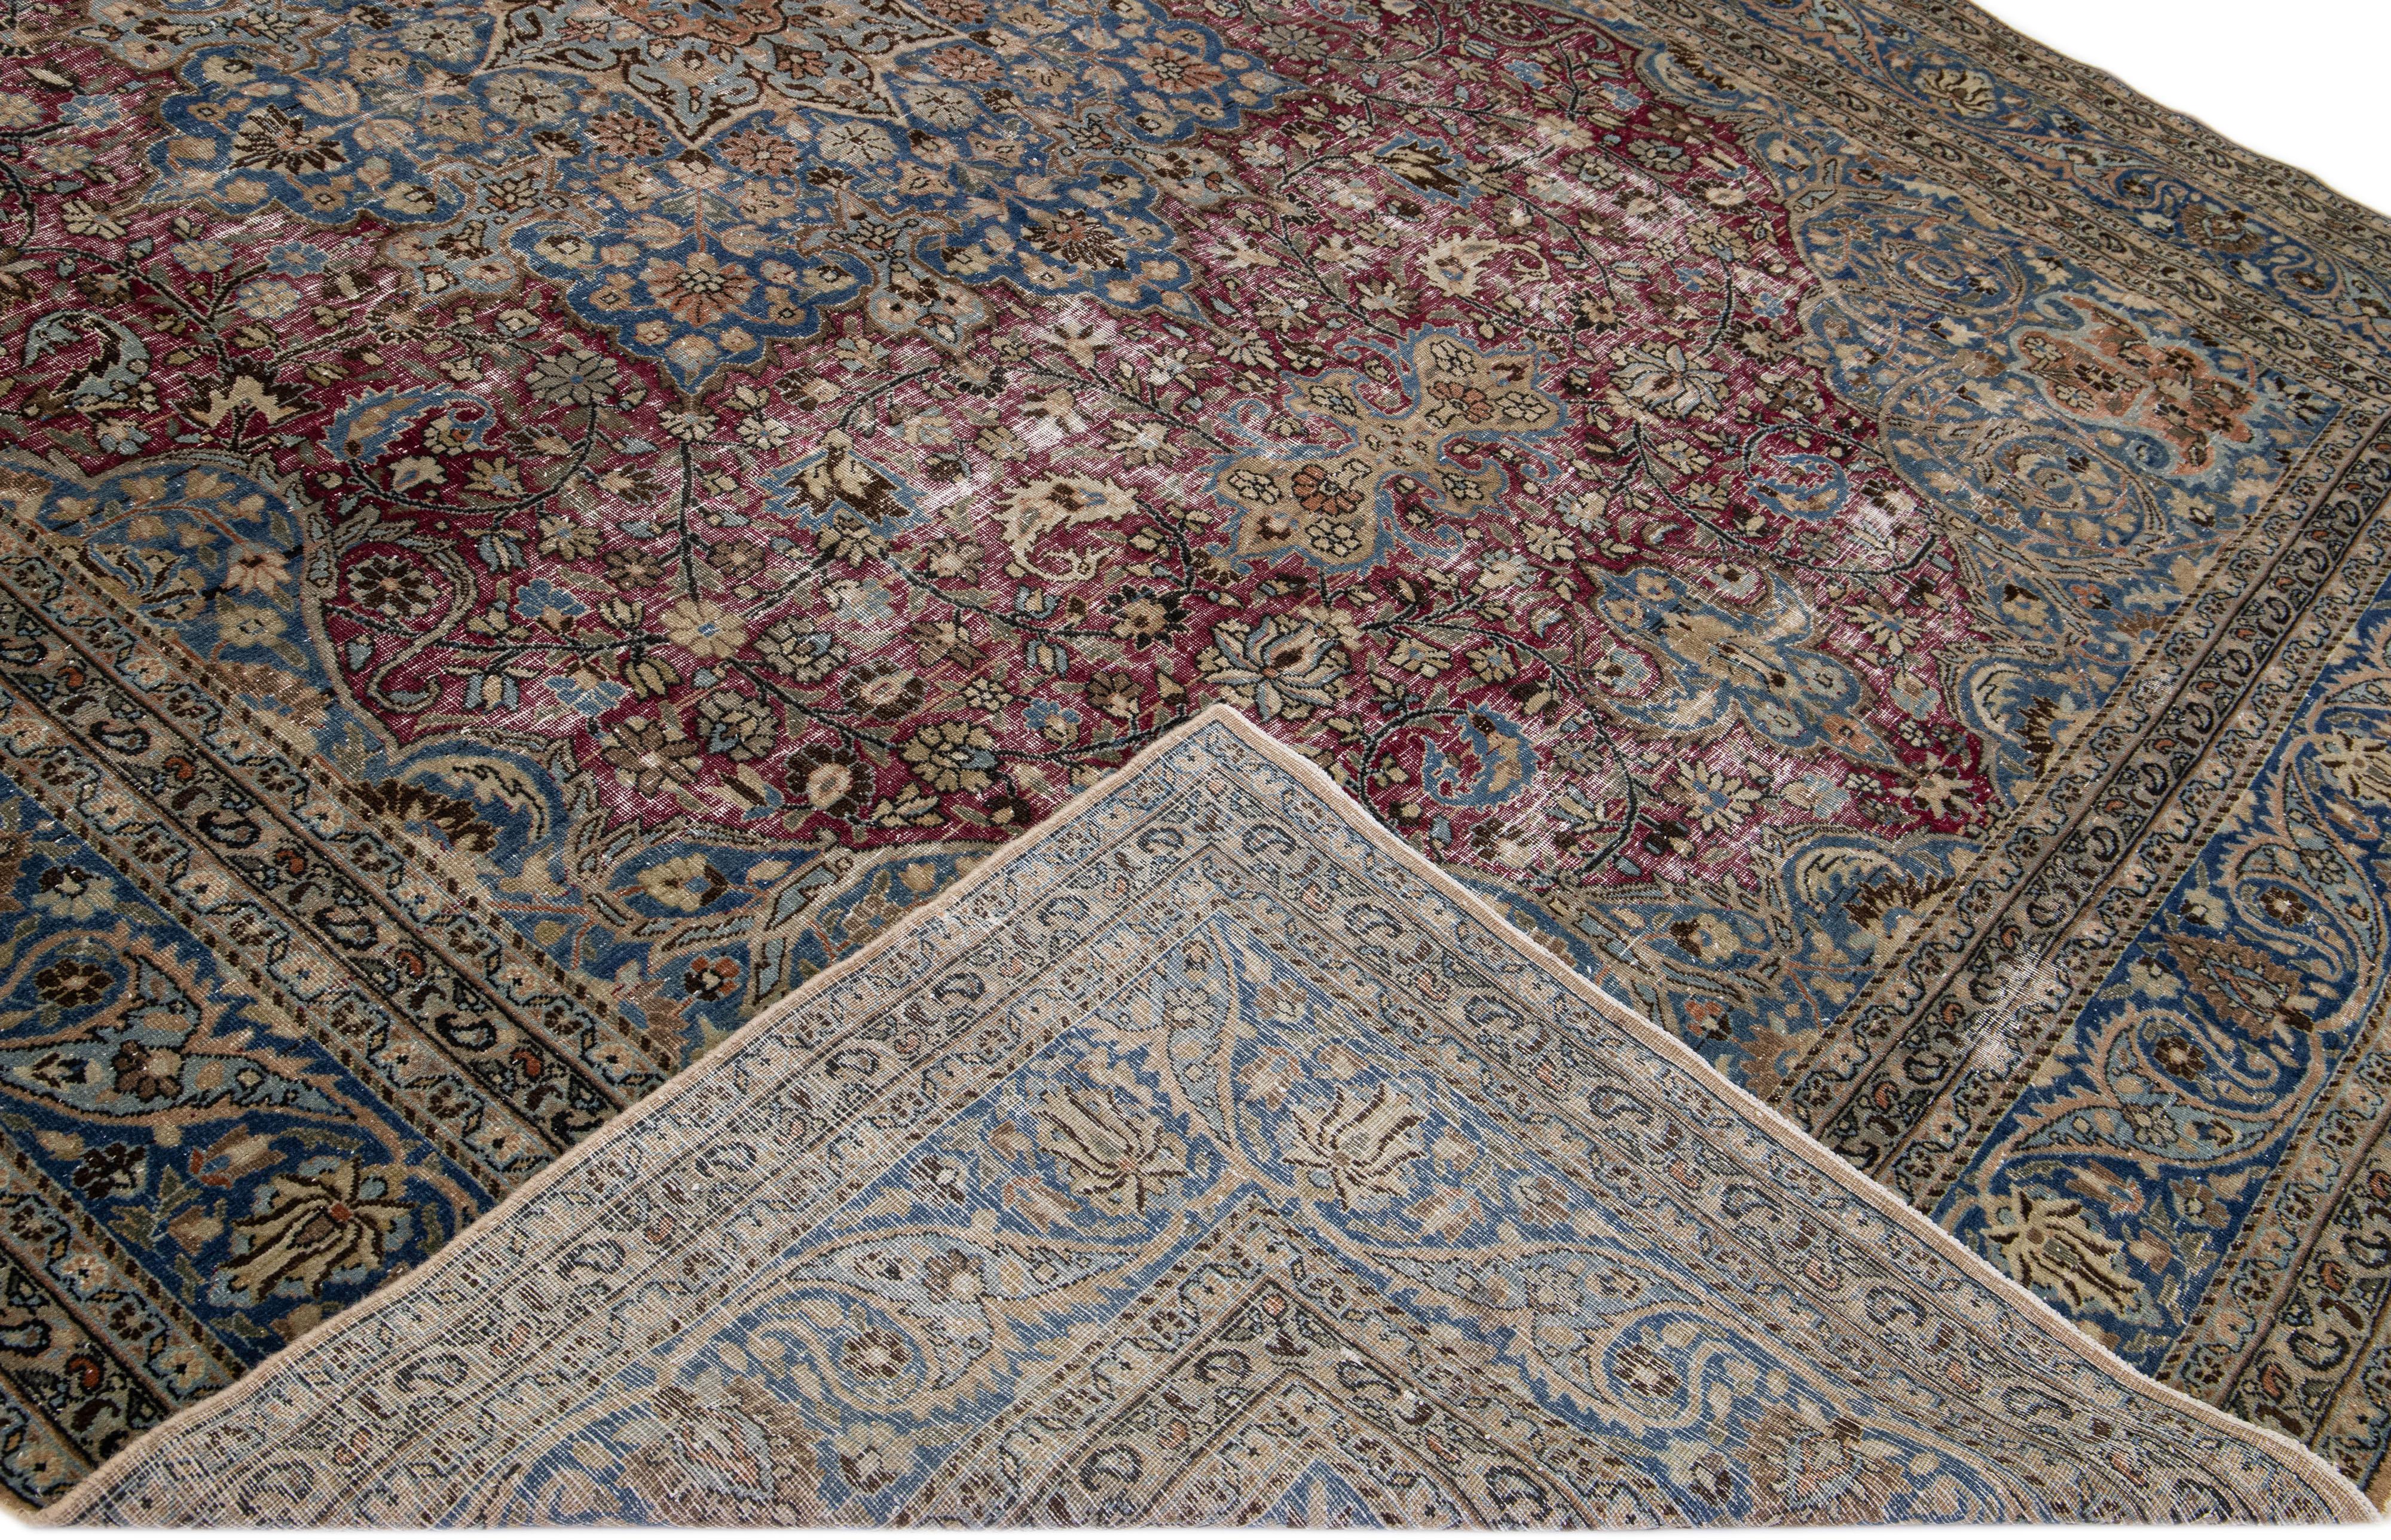 Beautiful Antique Mashad hand-knotted wool rug with a red field. This piece rug has a blue frame and accents in a gorgeous all-over classic medallion floral design. 

This rug measures: 10'7